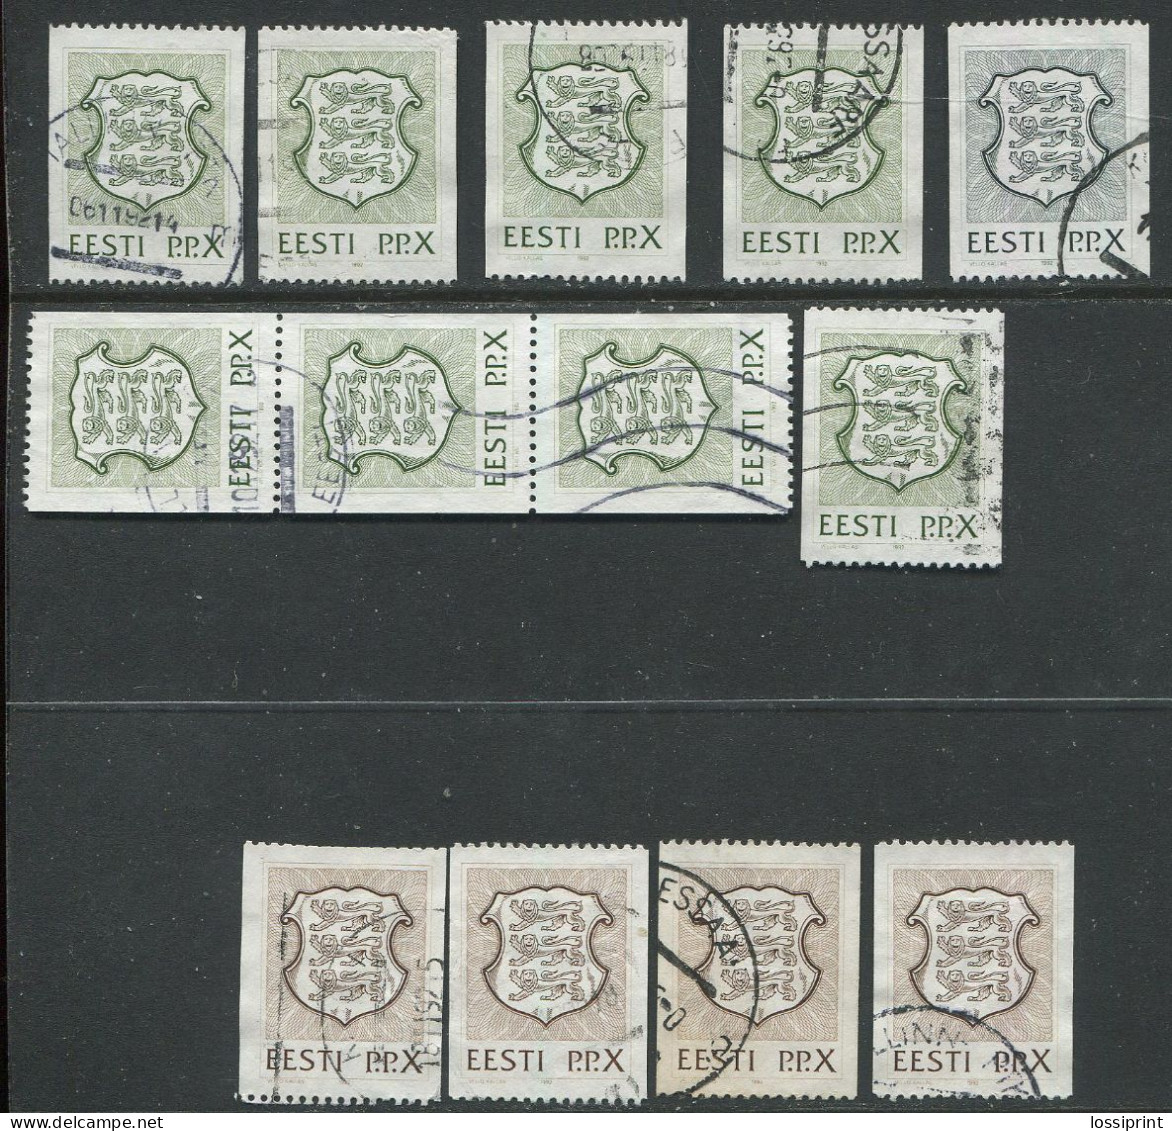 Estonia:Used Numbered Stamps P.P.X. All Issues, Numbers Seen On Second Scan, 1992 - Estland